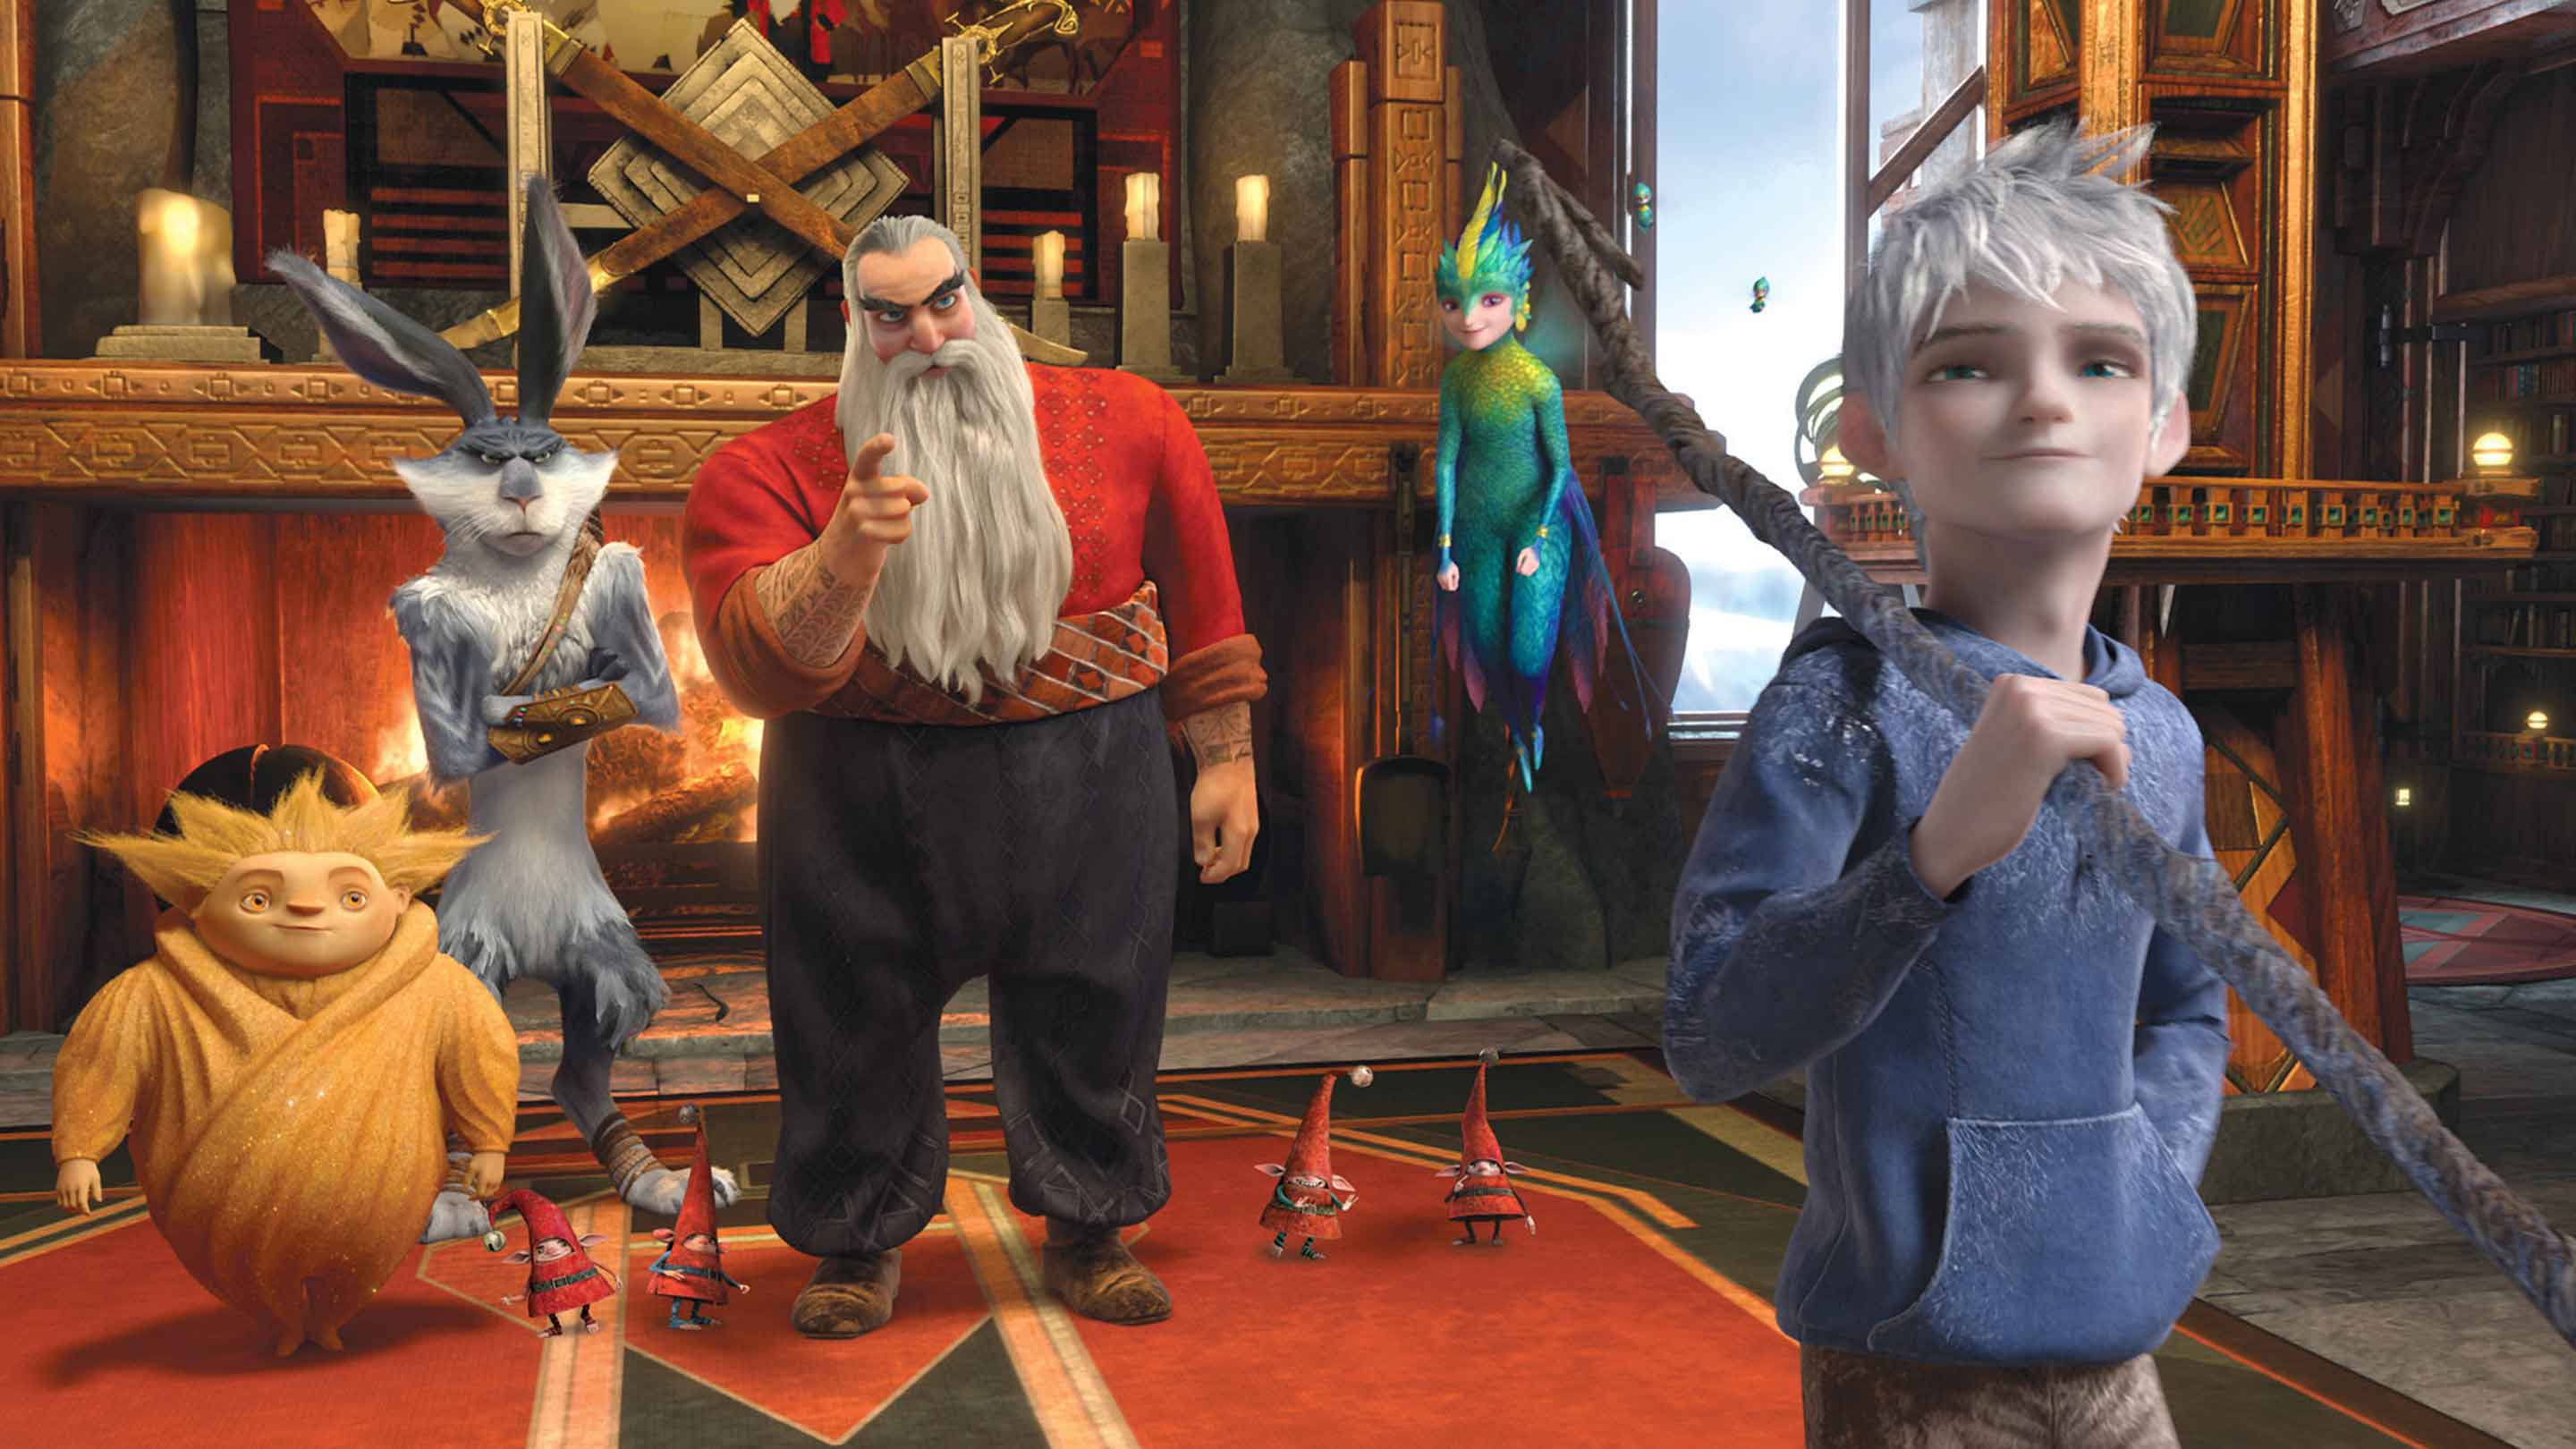 Rise of the Guardians streaming: where to watch online?